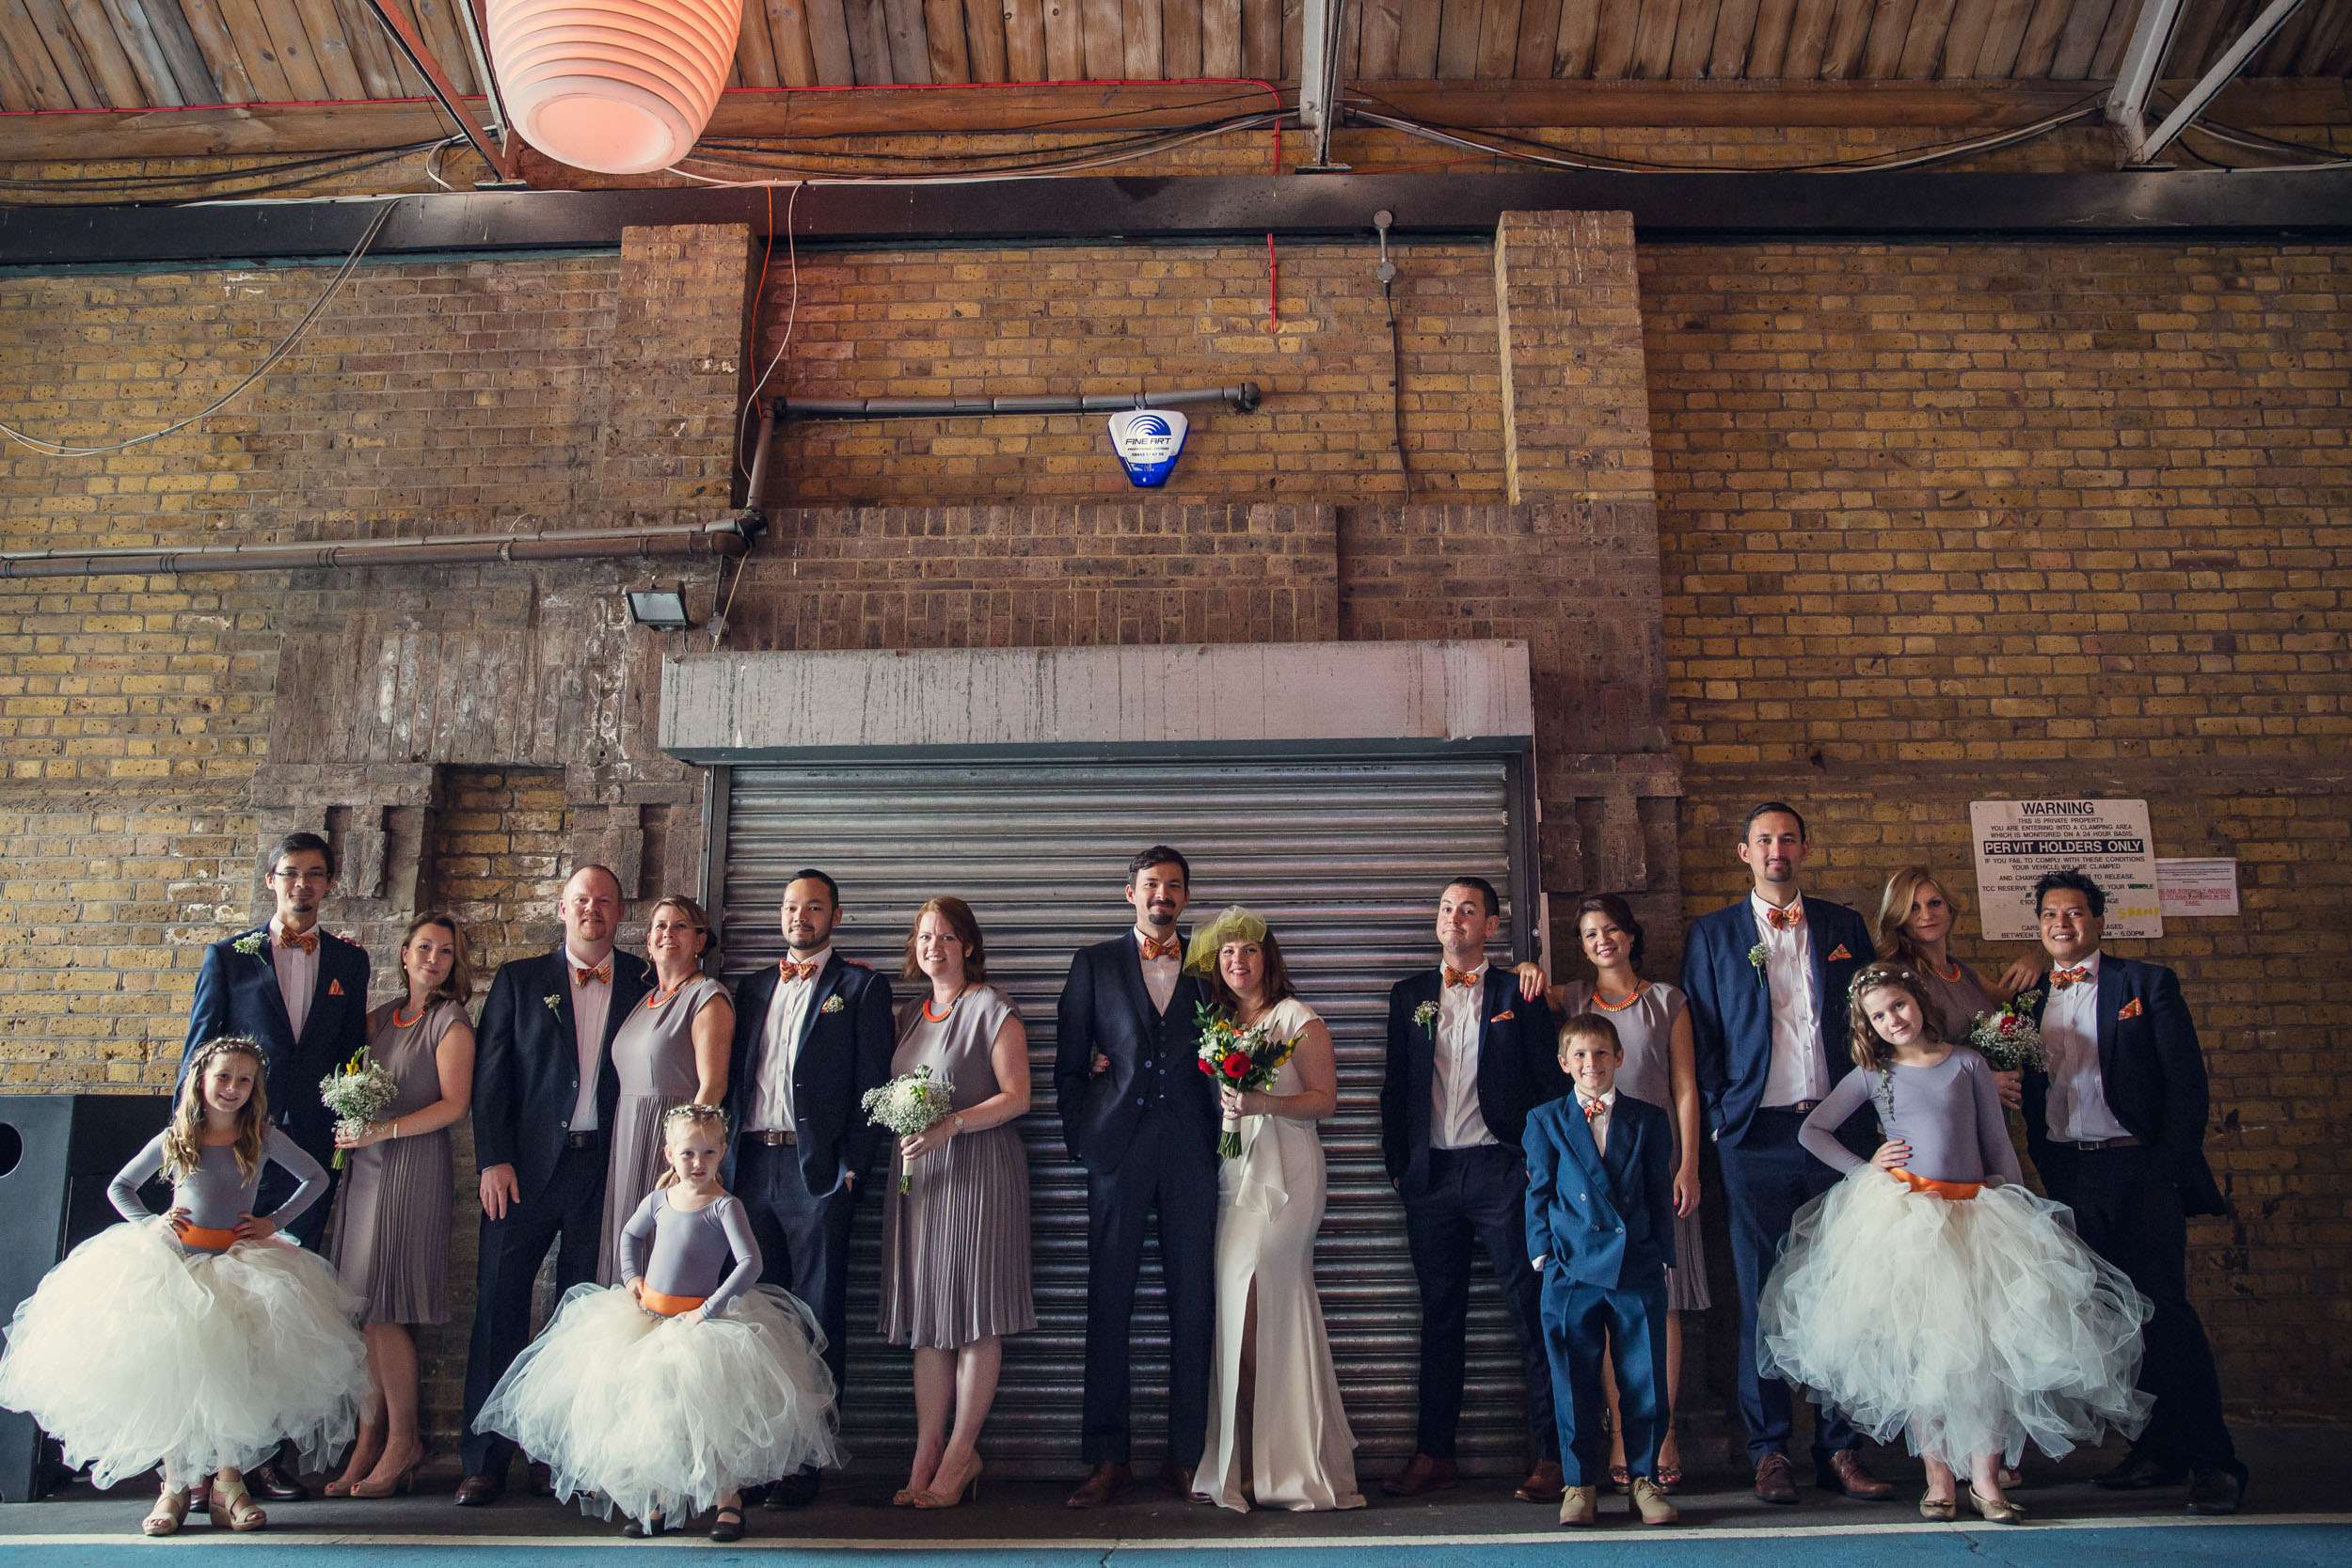 Indoor Festival Wedding at an Industrial Warehouse (21)